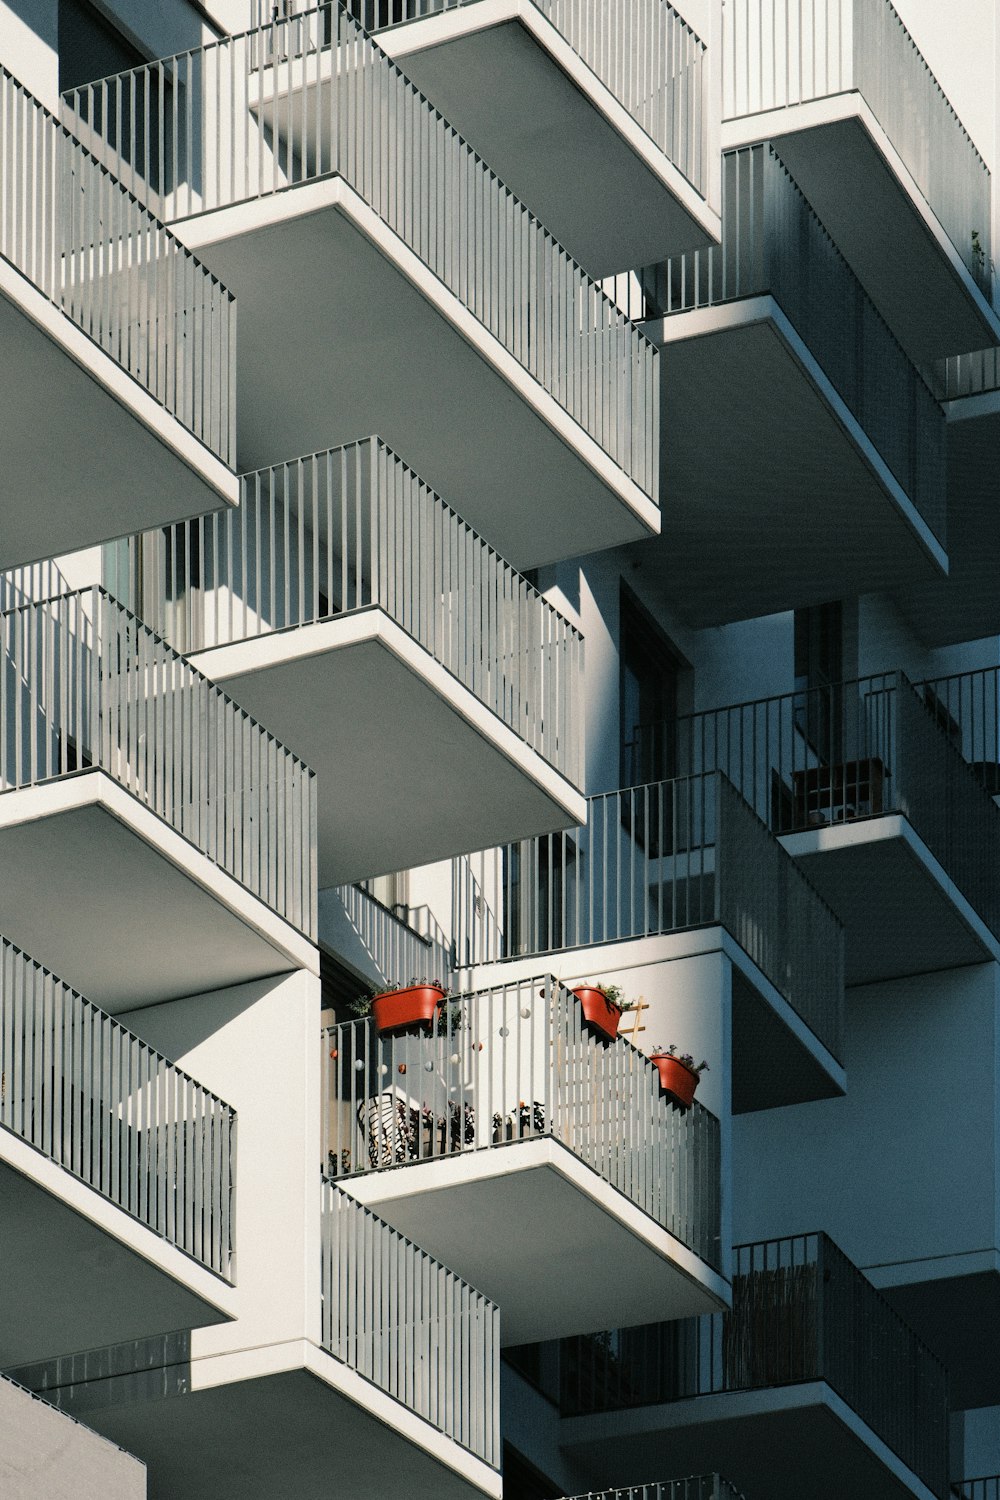 an apartment building with balconies and balconies on the balconies